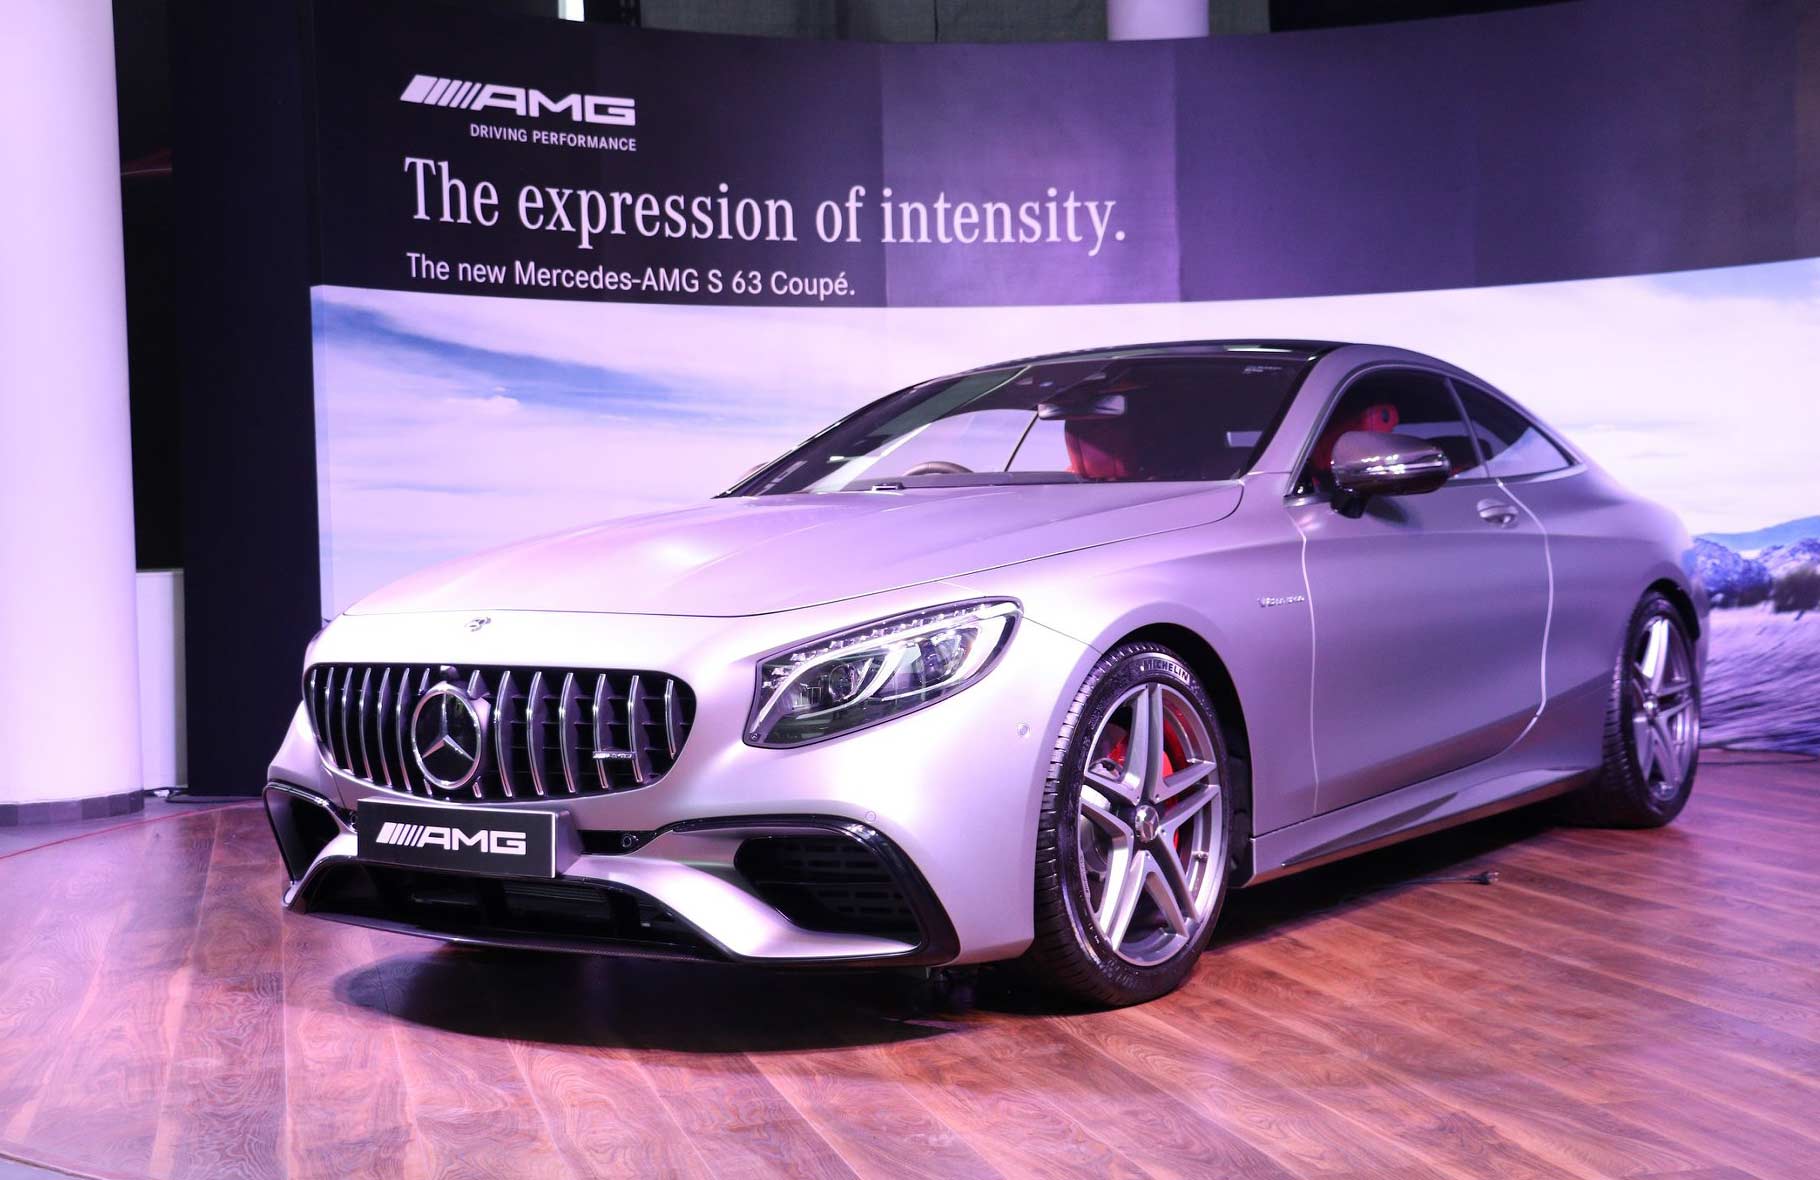 Mercedes-Benz India has launched the Mercedes-AMG S 63 Coupe, pric...